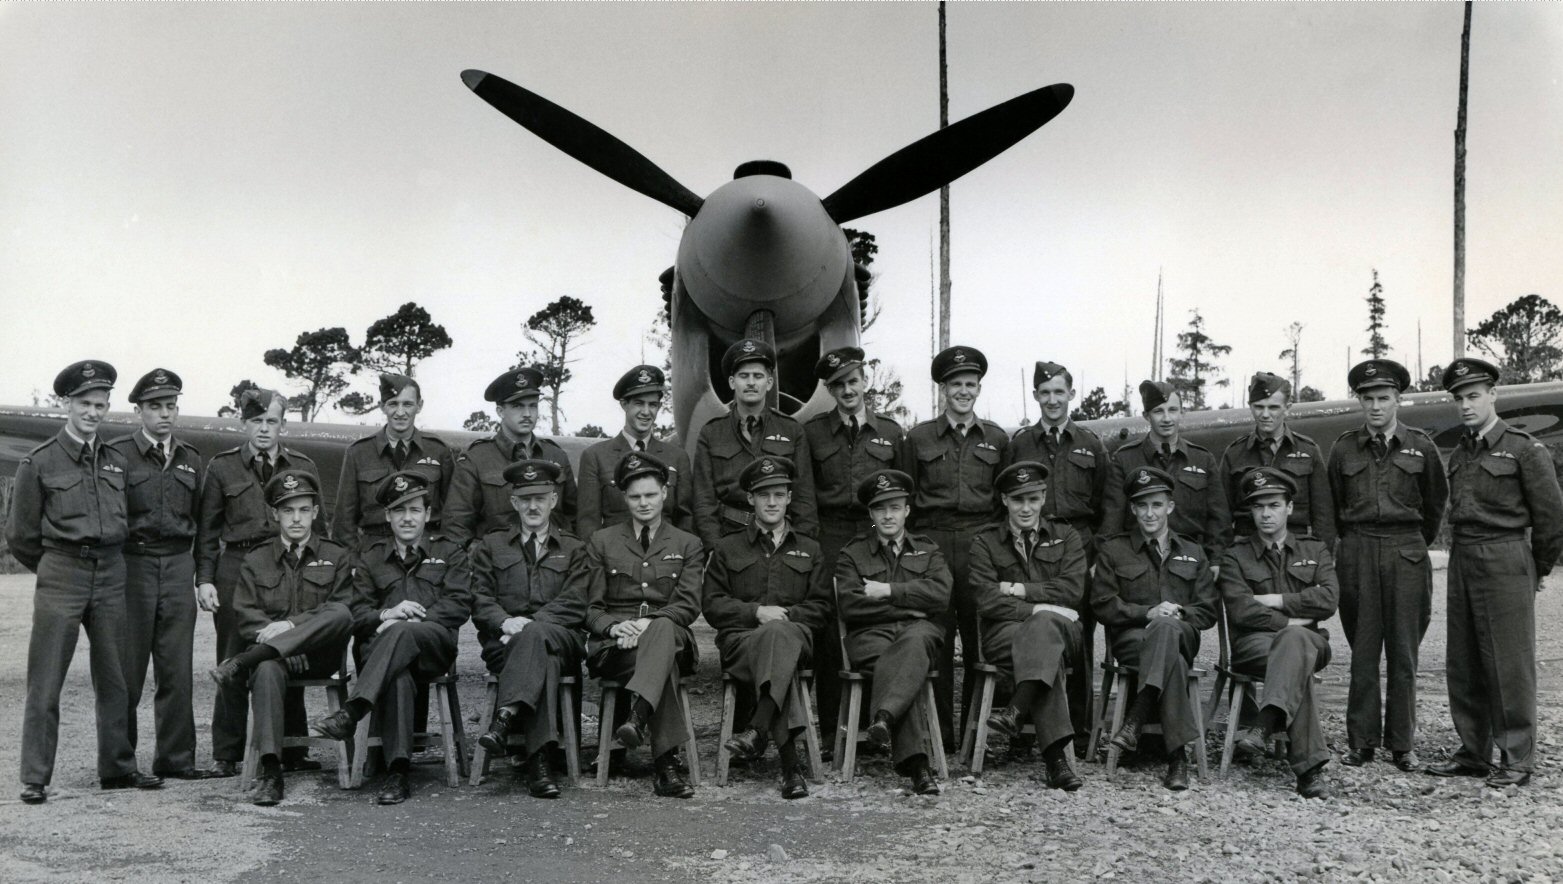 From 1943 of 118 Sqn, Ward is standing at far left.